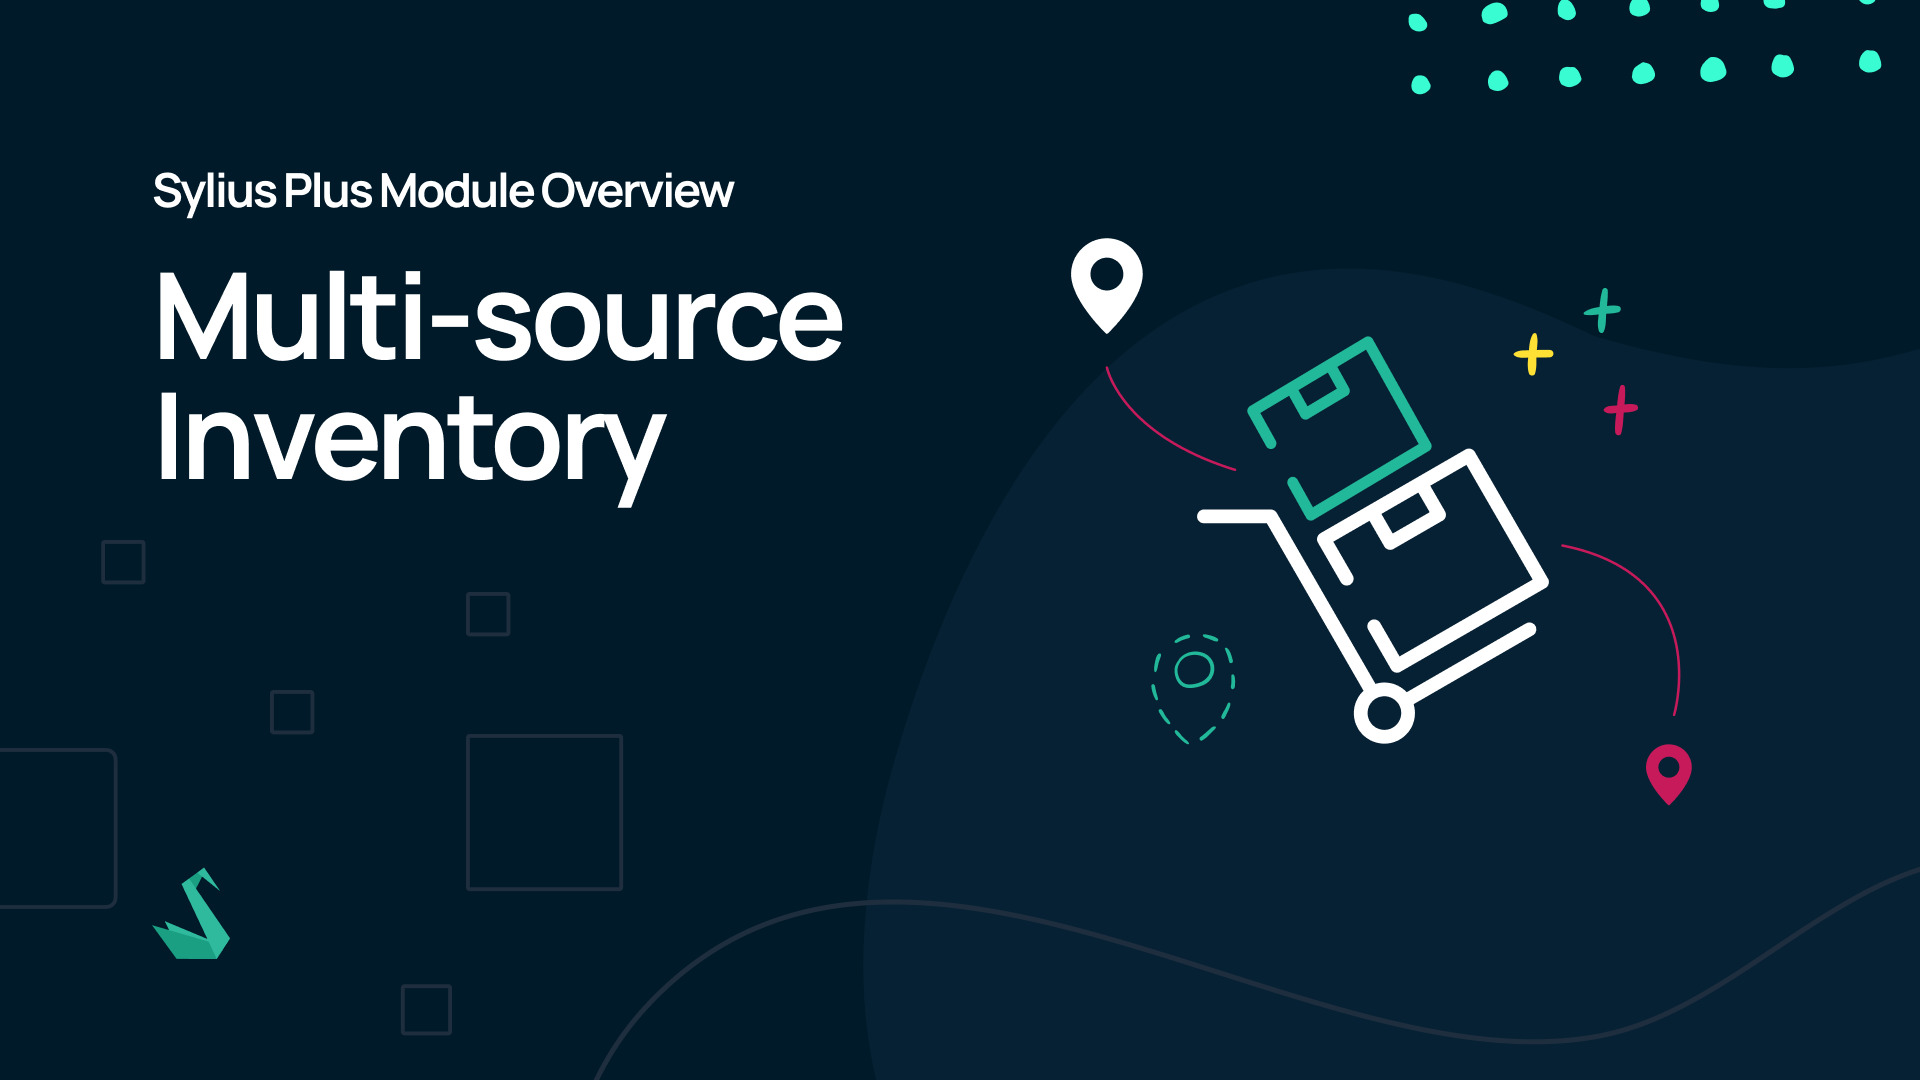 Sylius Plus Module Overview: Multi-source Inventory